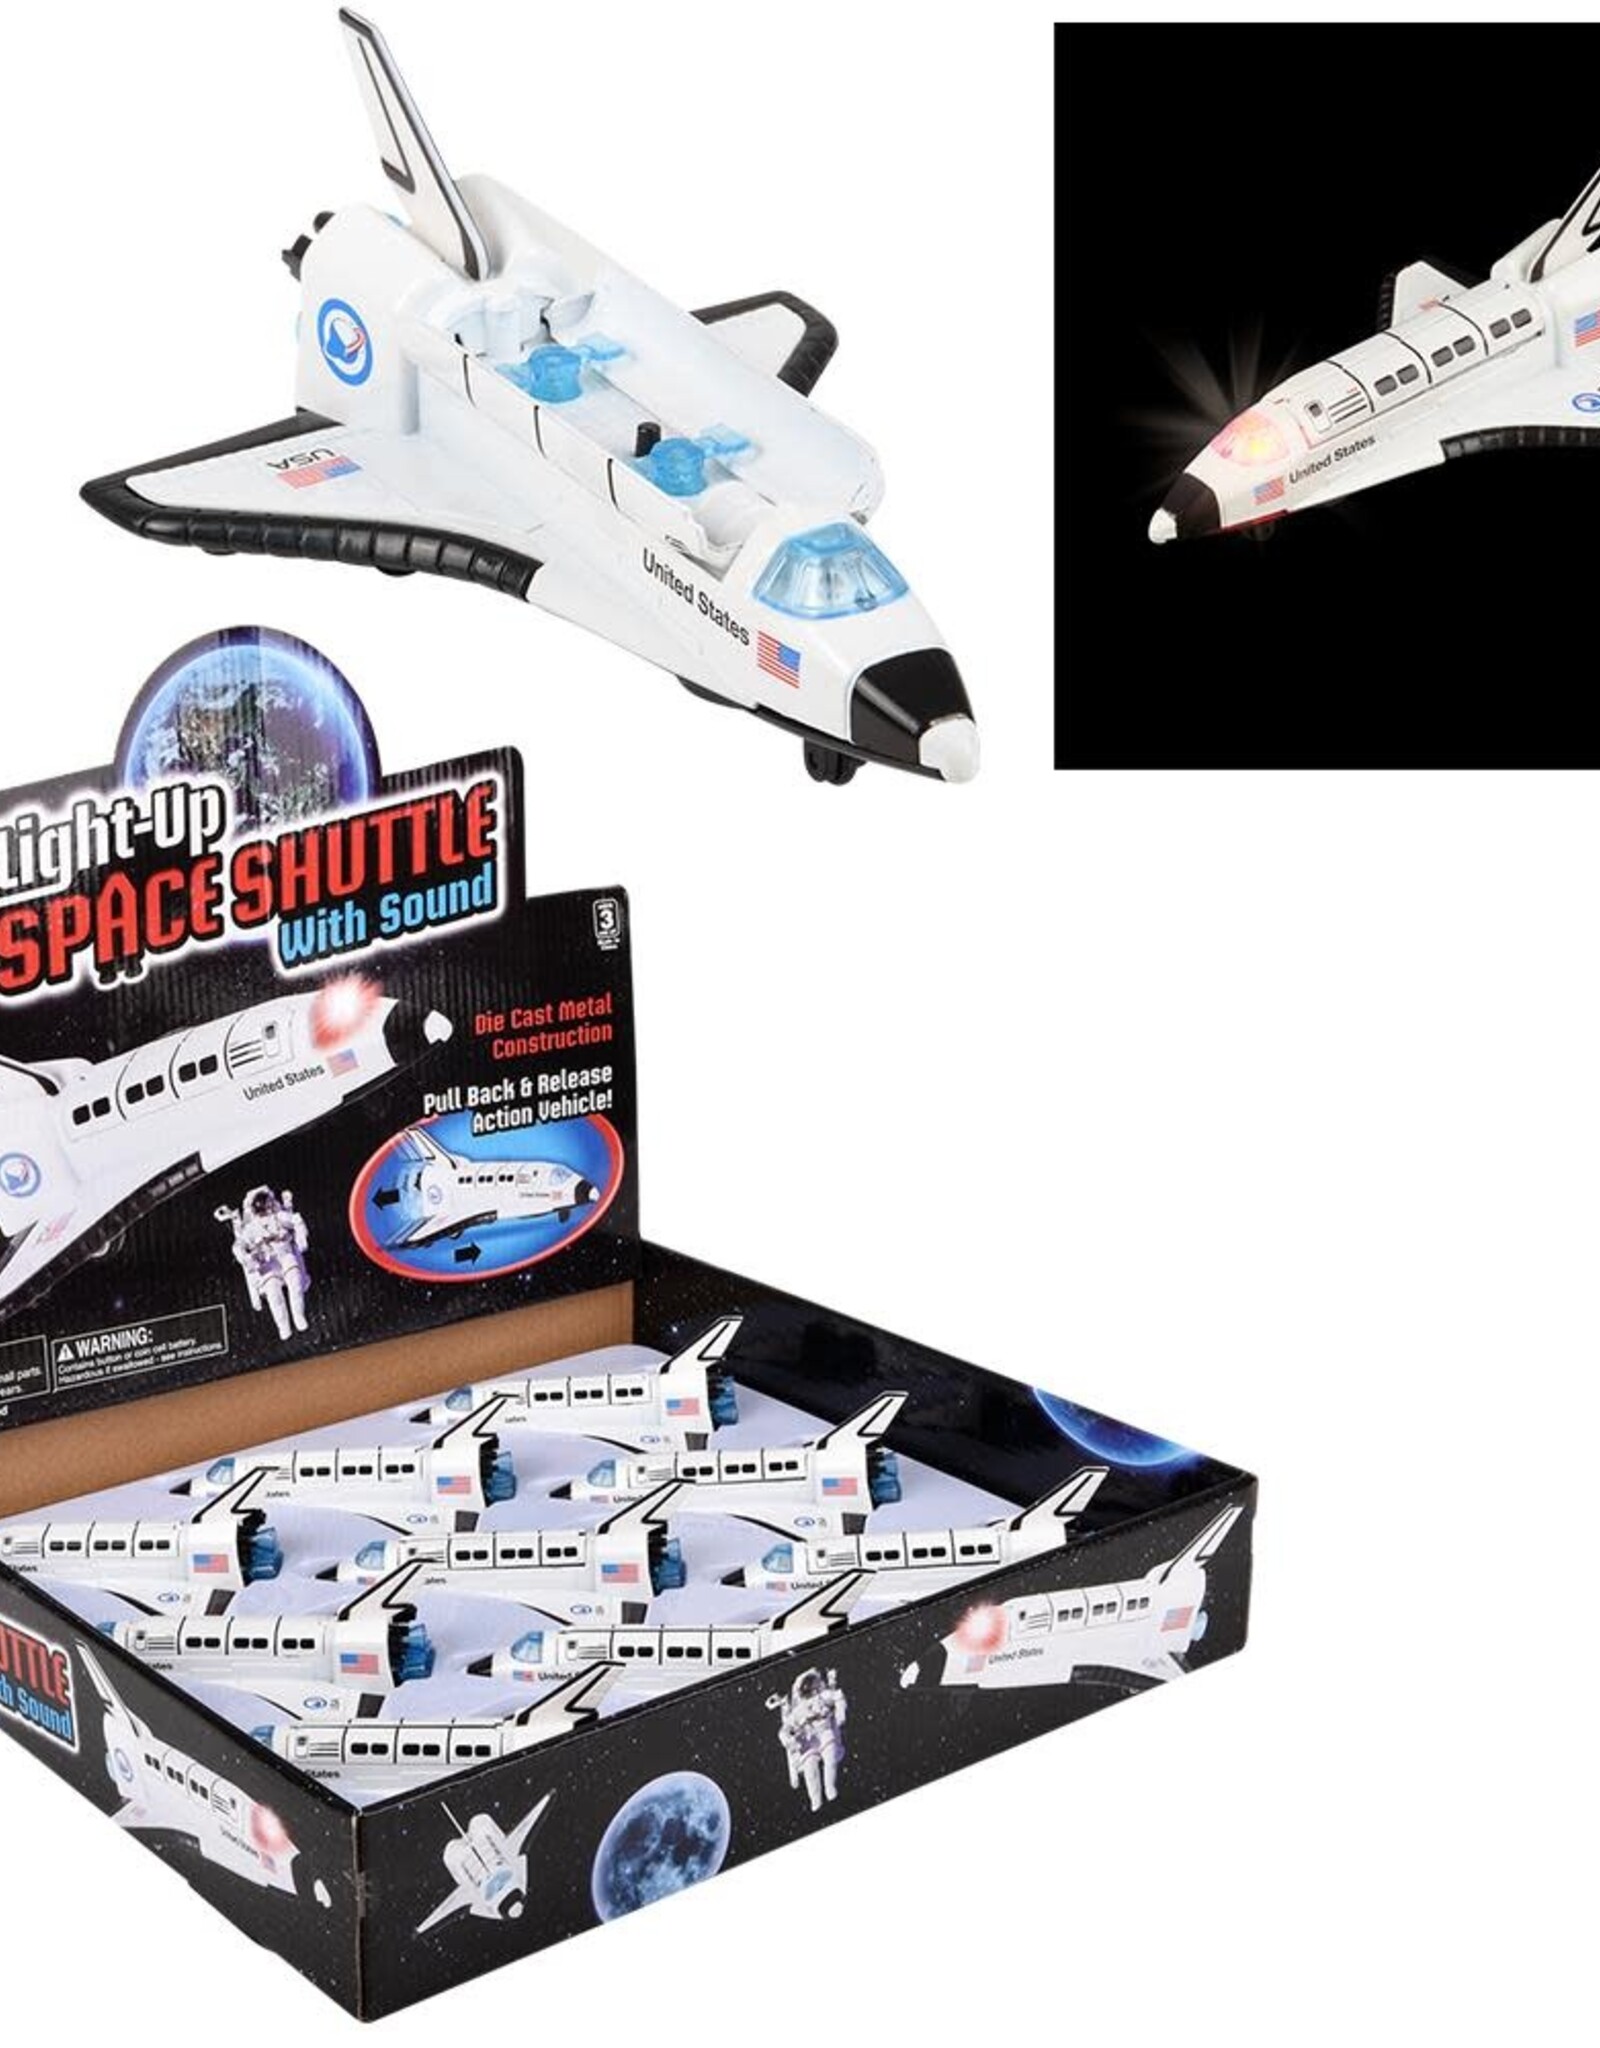 TOY NETWORK 6" LIGHT-UP SPACE SHUTTLE WITH SOUND